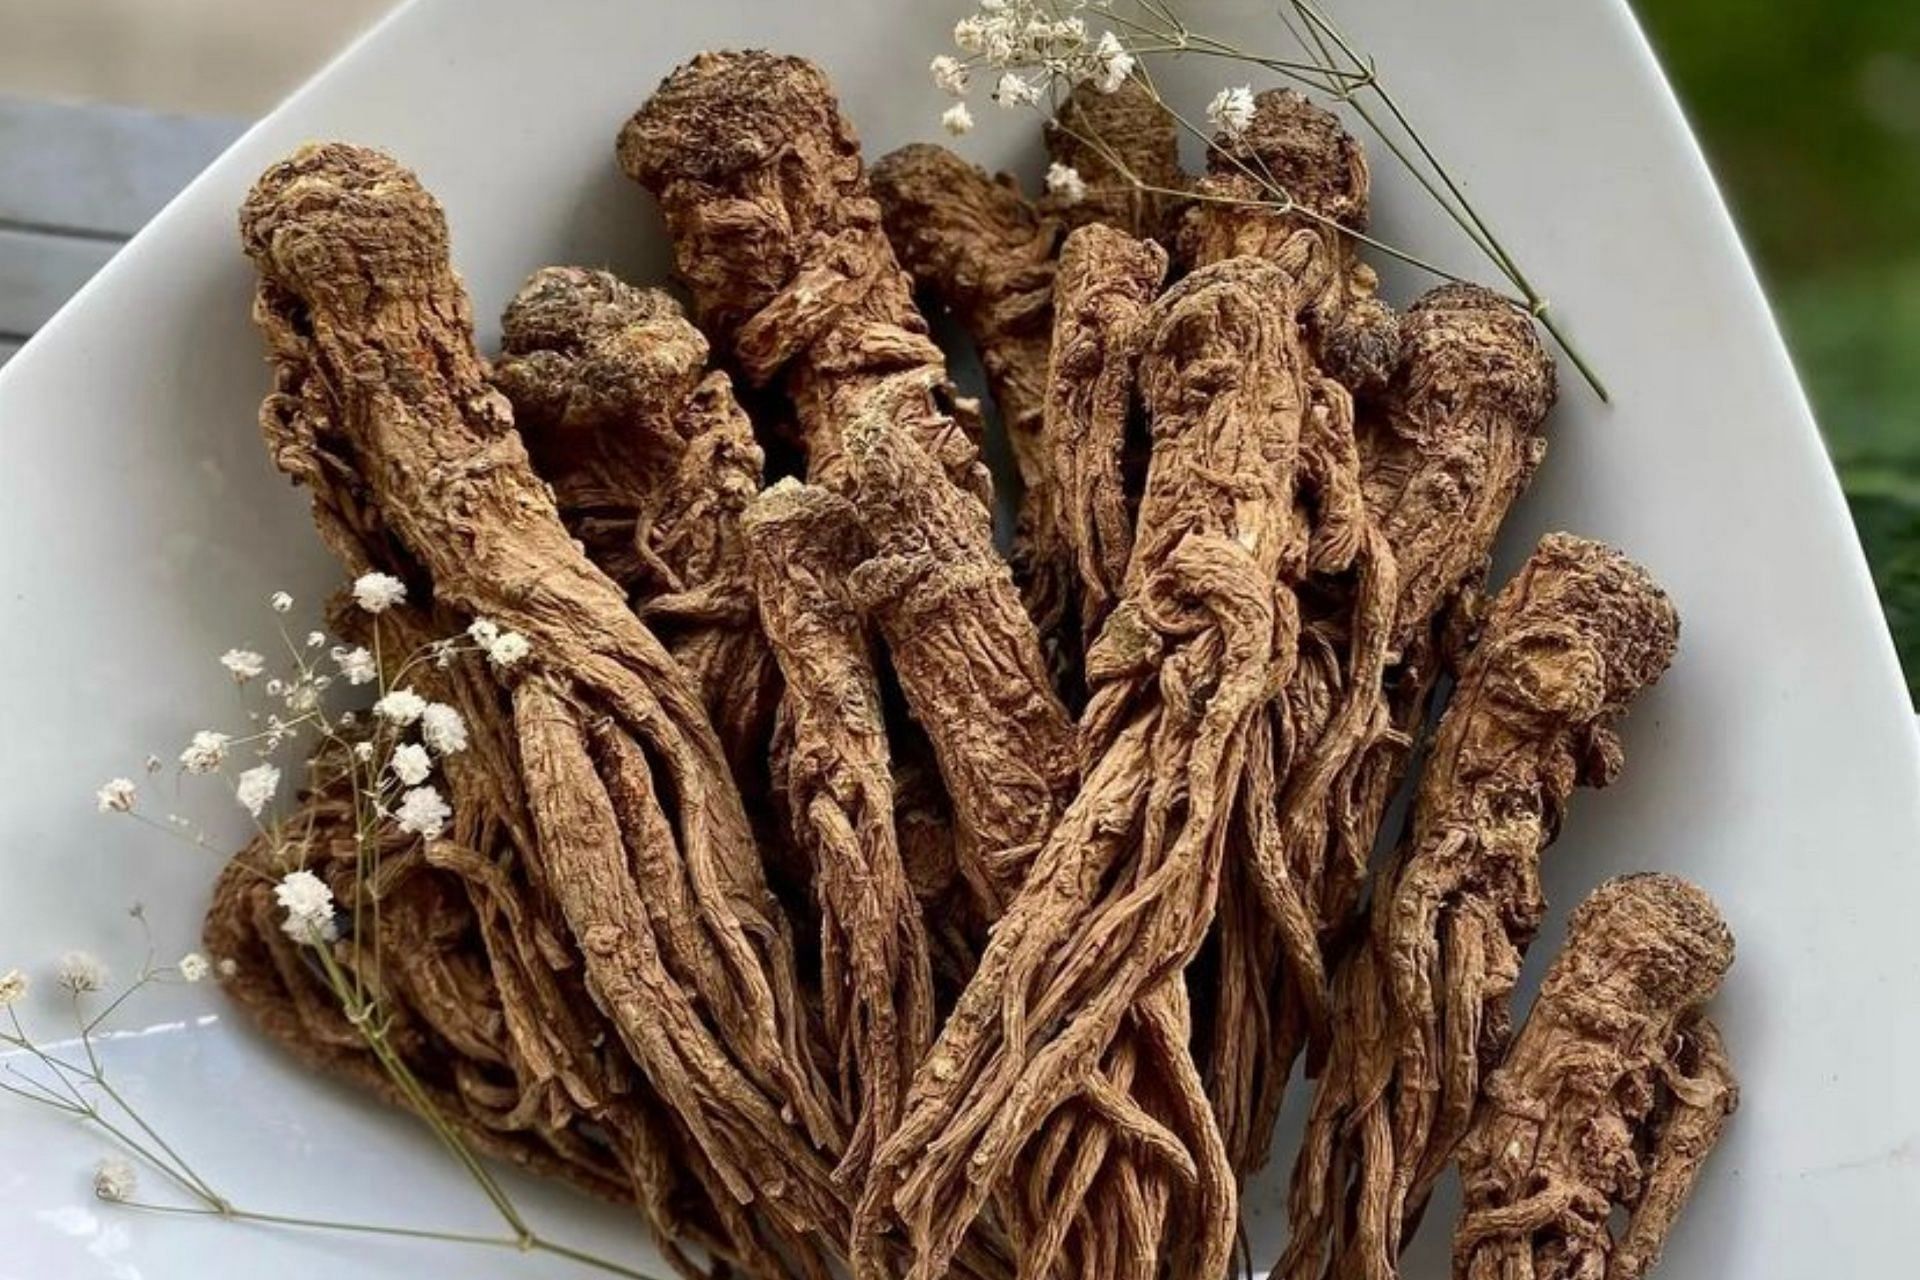 The Chinese herb, dong quai, is called the female ginseng. (Photo via Instagram/reprovive)